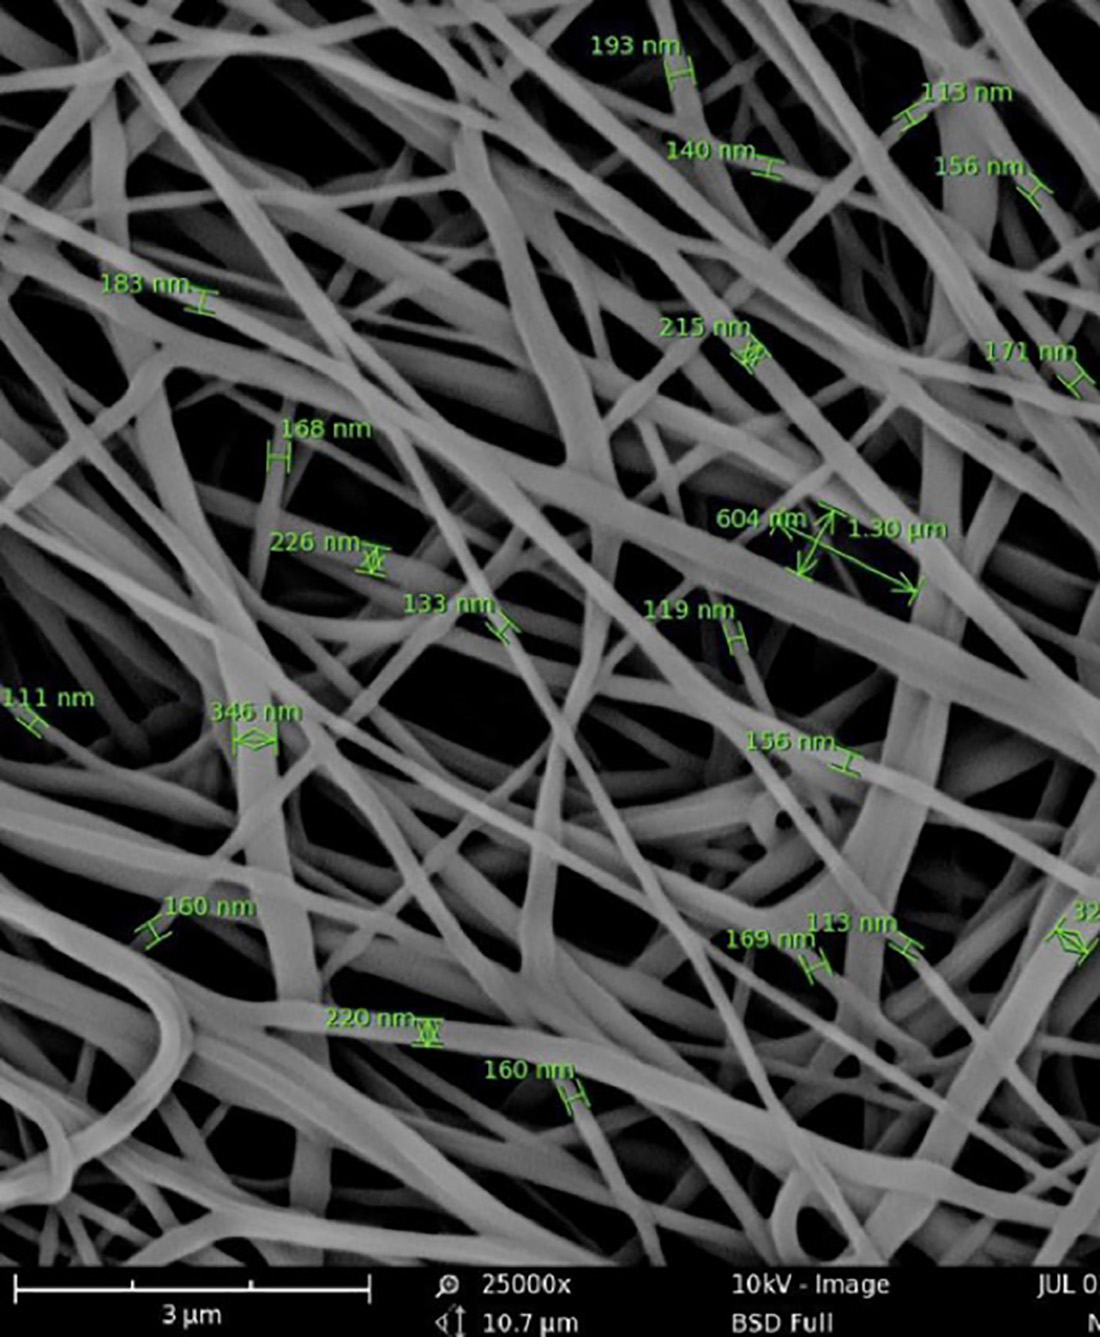 NXTNANO is capable of controllably producing nanofiber from 50 nanometers